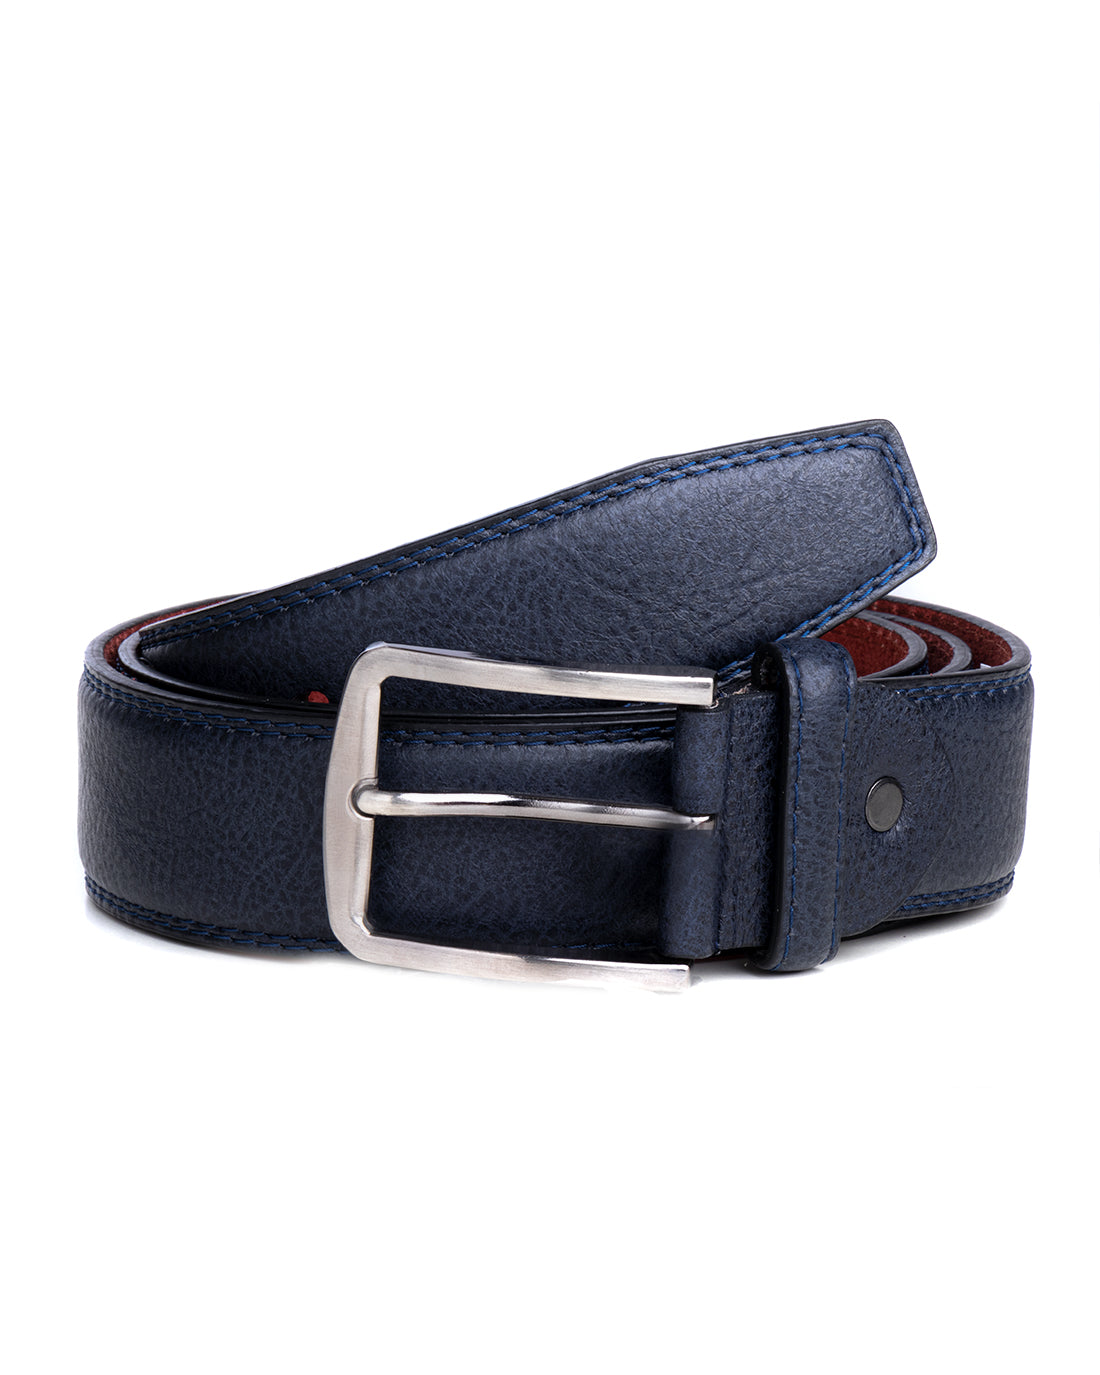 Wide Men's Belt Adjustable Metal Buckle Blue Textured Faux Leather GIOSAL-A2118A